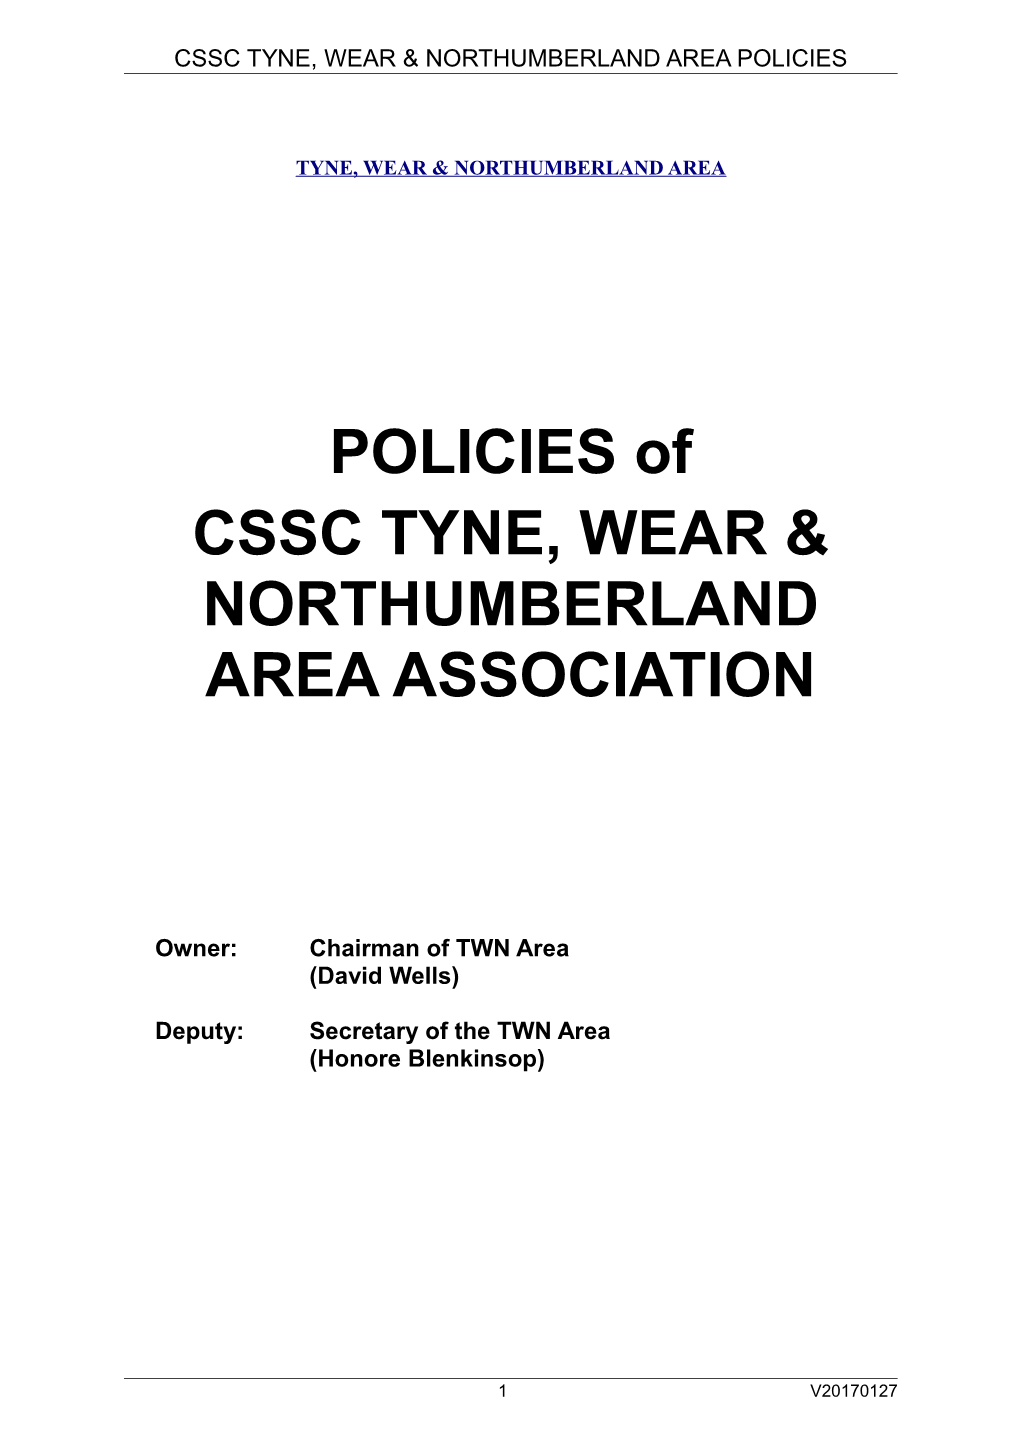 CSSC Newcastle Area Policies